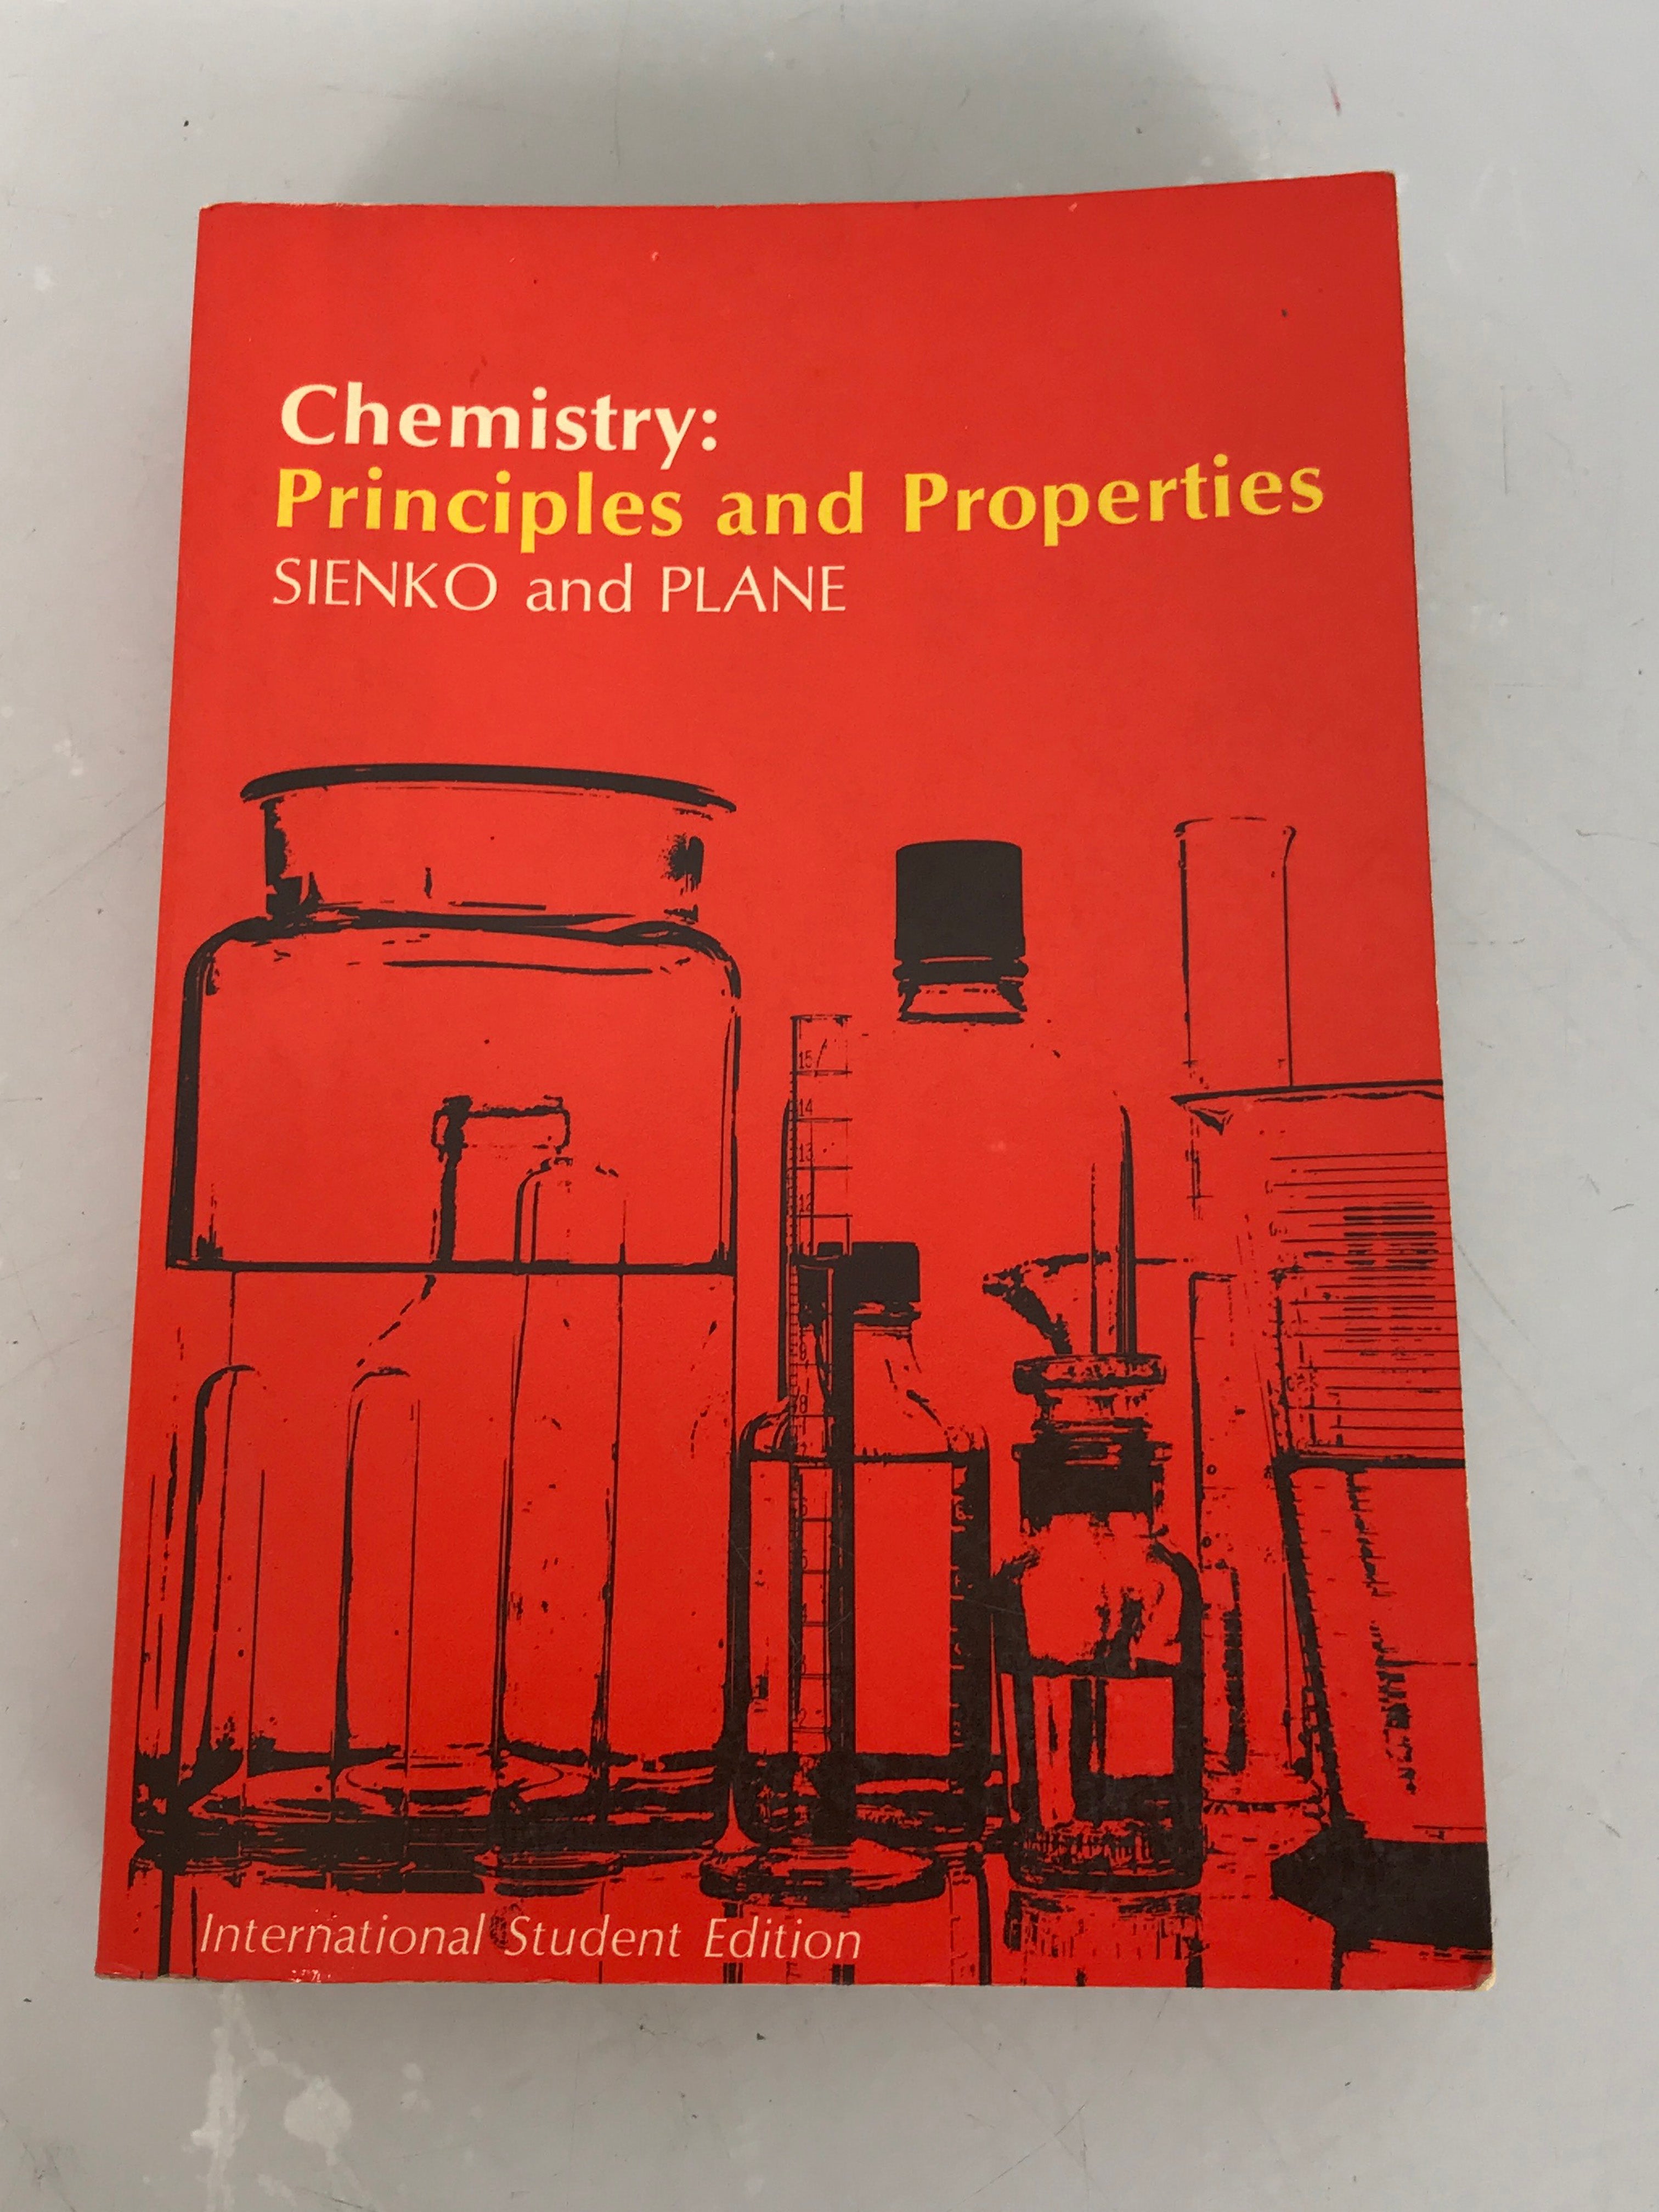 Chemistry: Principles and Properties by Sienko and Plane 1966 SC